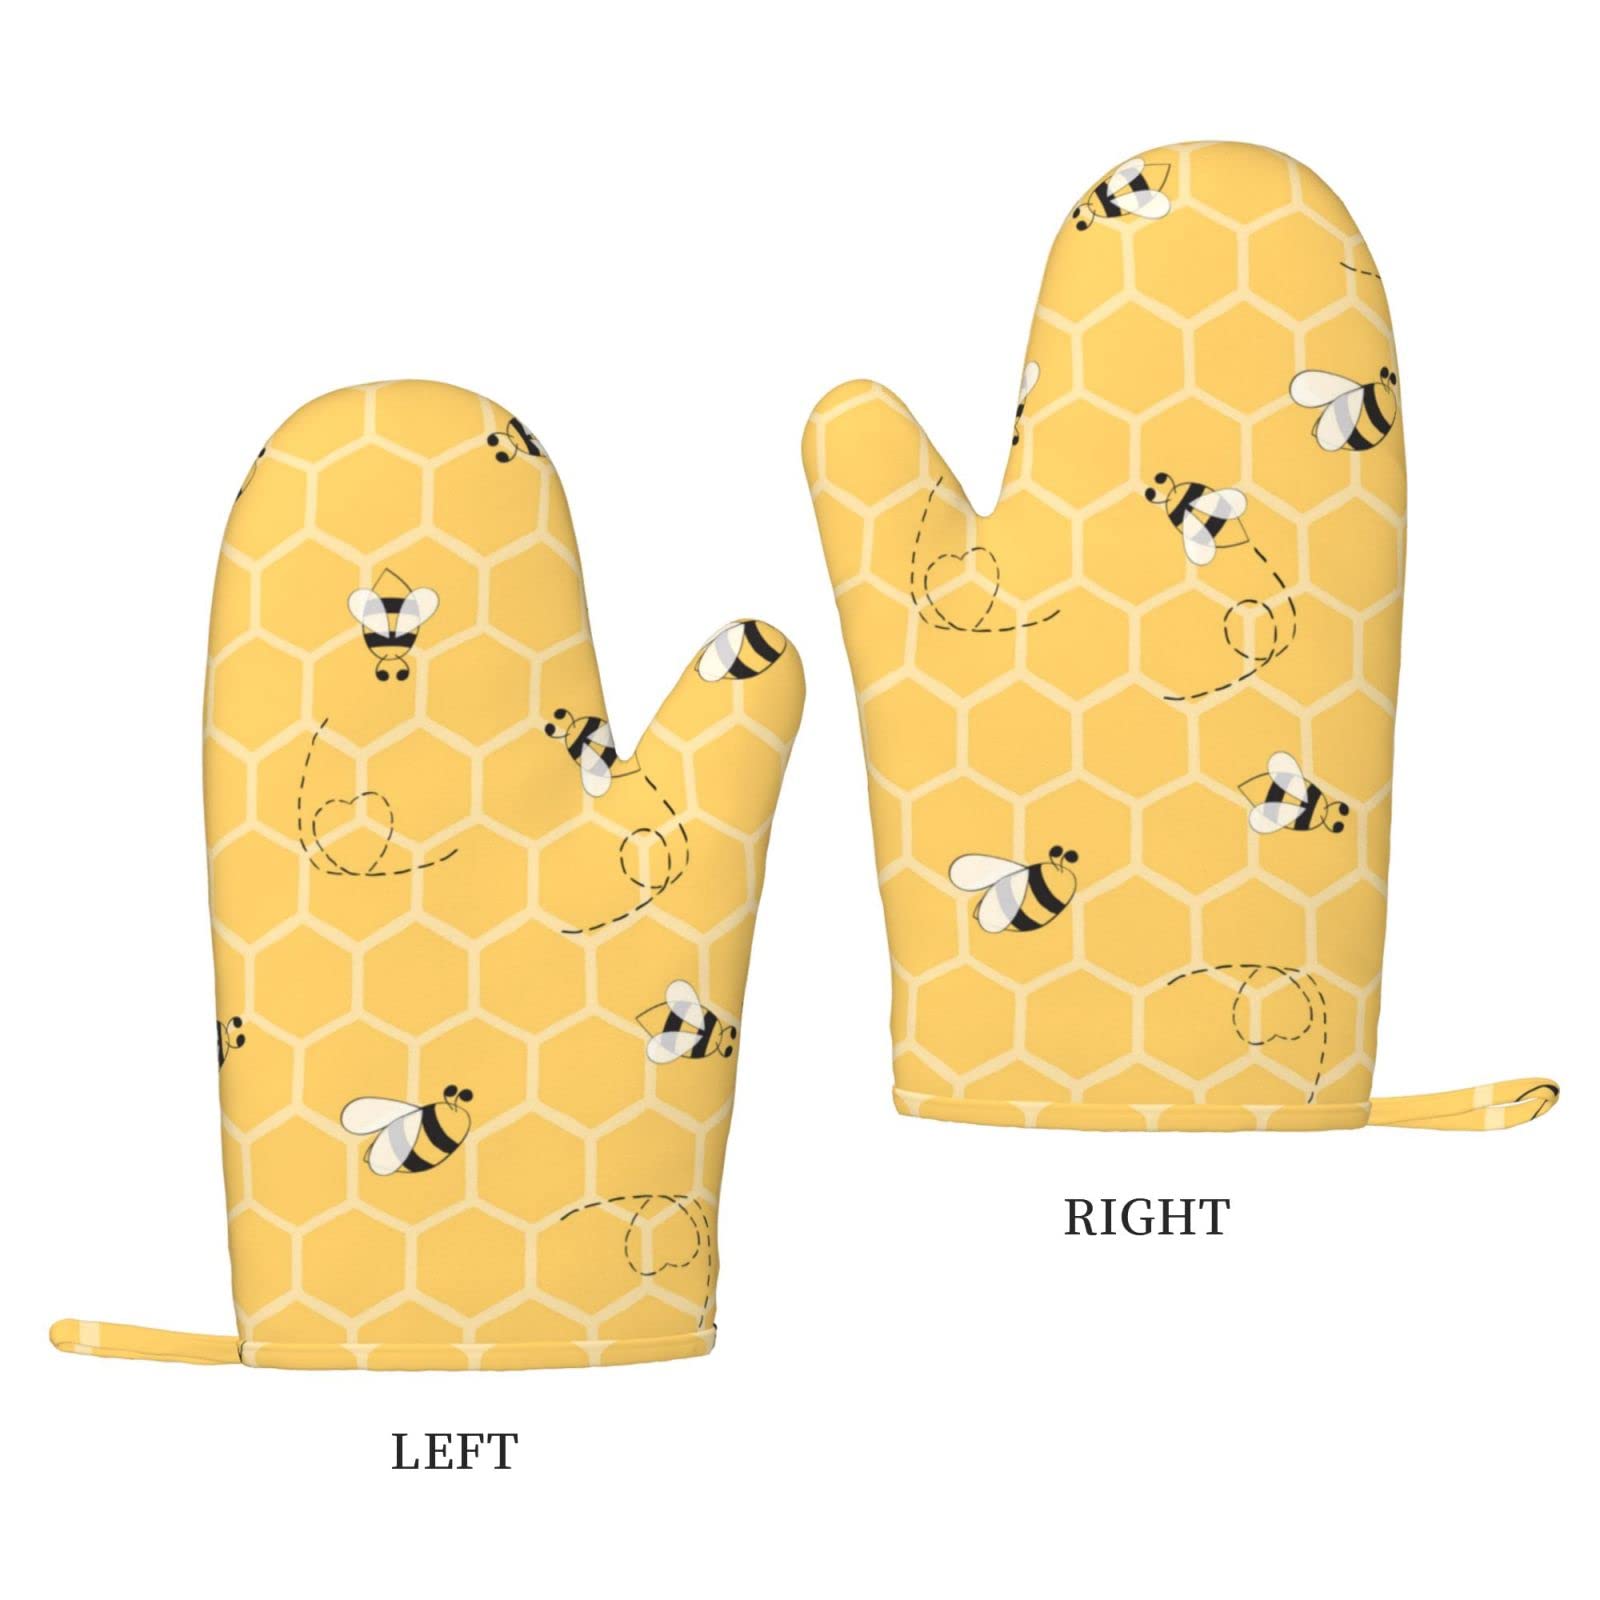 1 Pair Durable Funny Honey Bees Kitchen Silicone Oven Mitts, Yellow Beehive Heat Resistant Lining Fabric Pot Holder Gloves for BBQ Cooking Baking